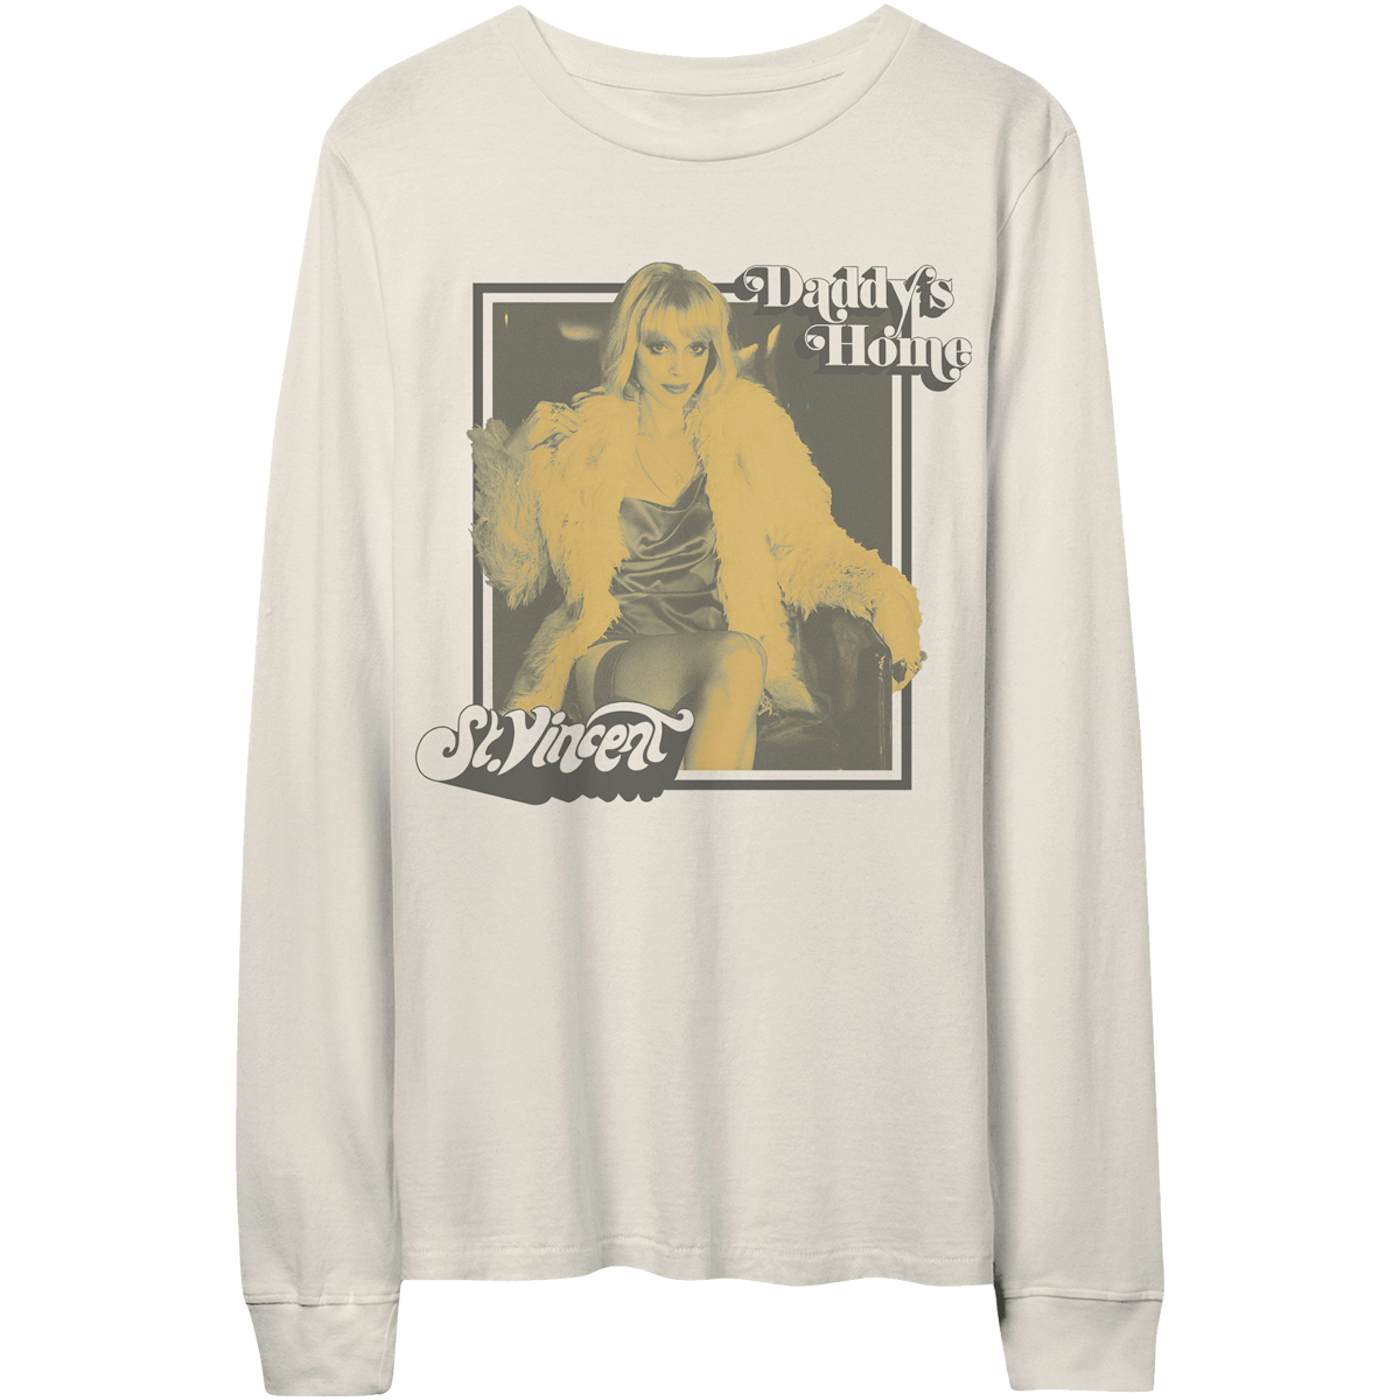 St. Vincent - Daddy's Home White Longsleeve